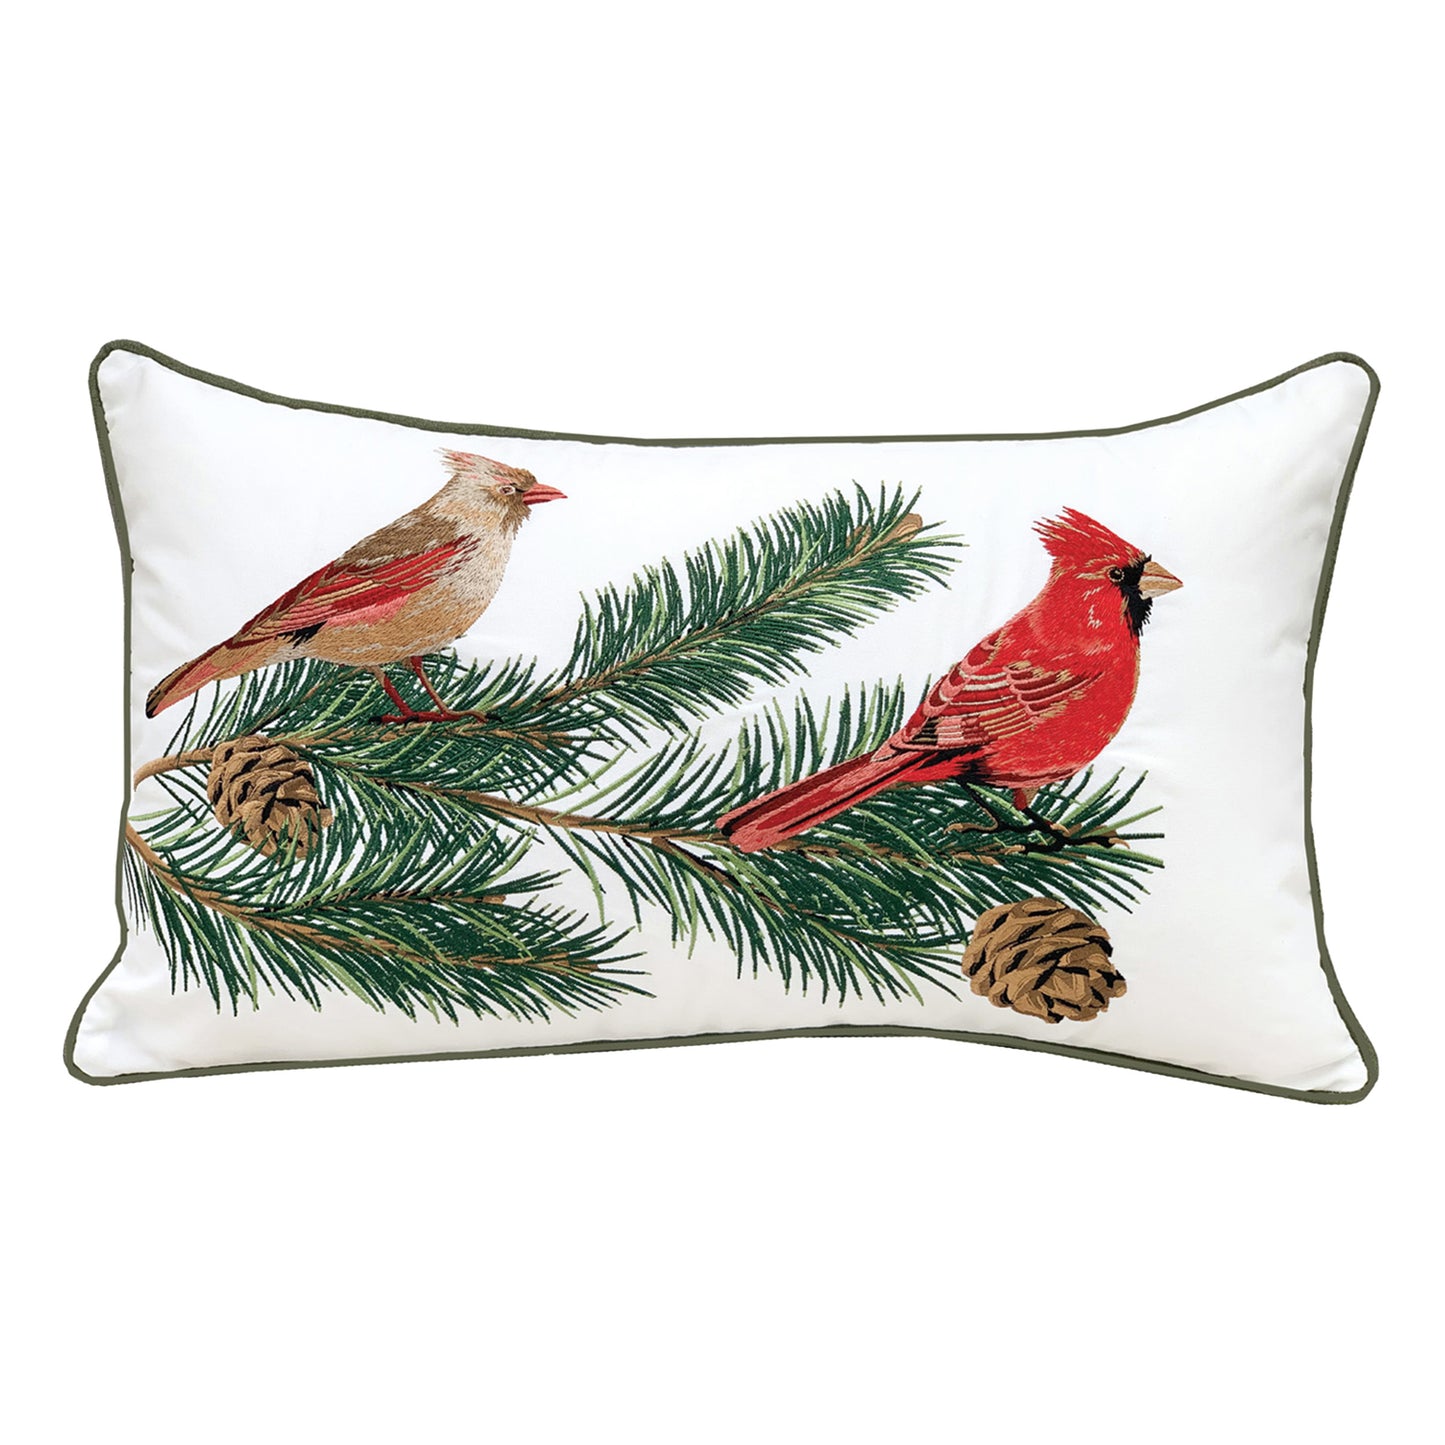 Male and female cardinals sitting upon a pine branch; embroidered on a white background with green piped edging.